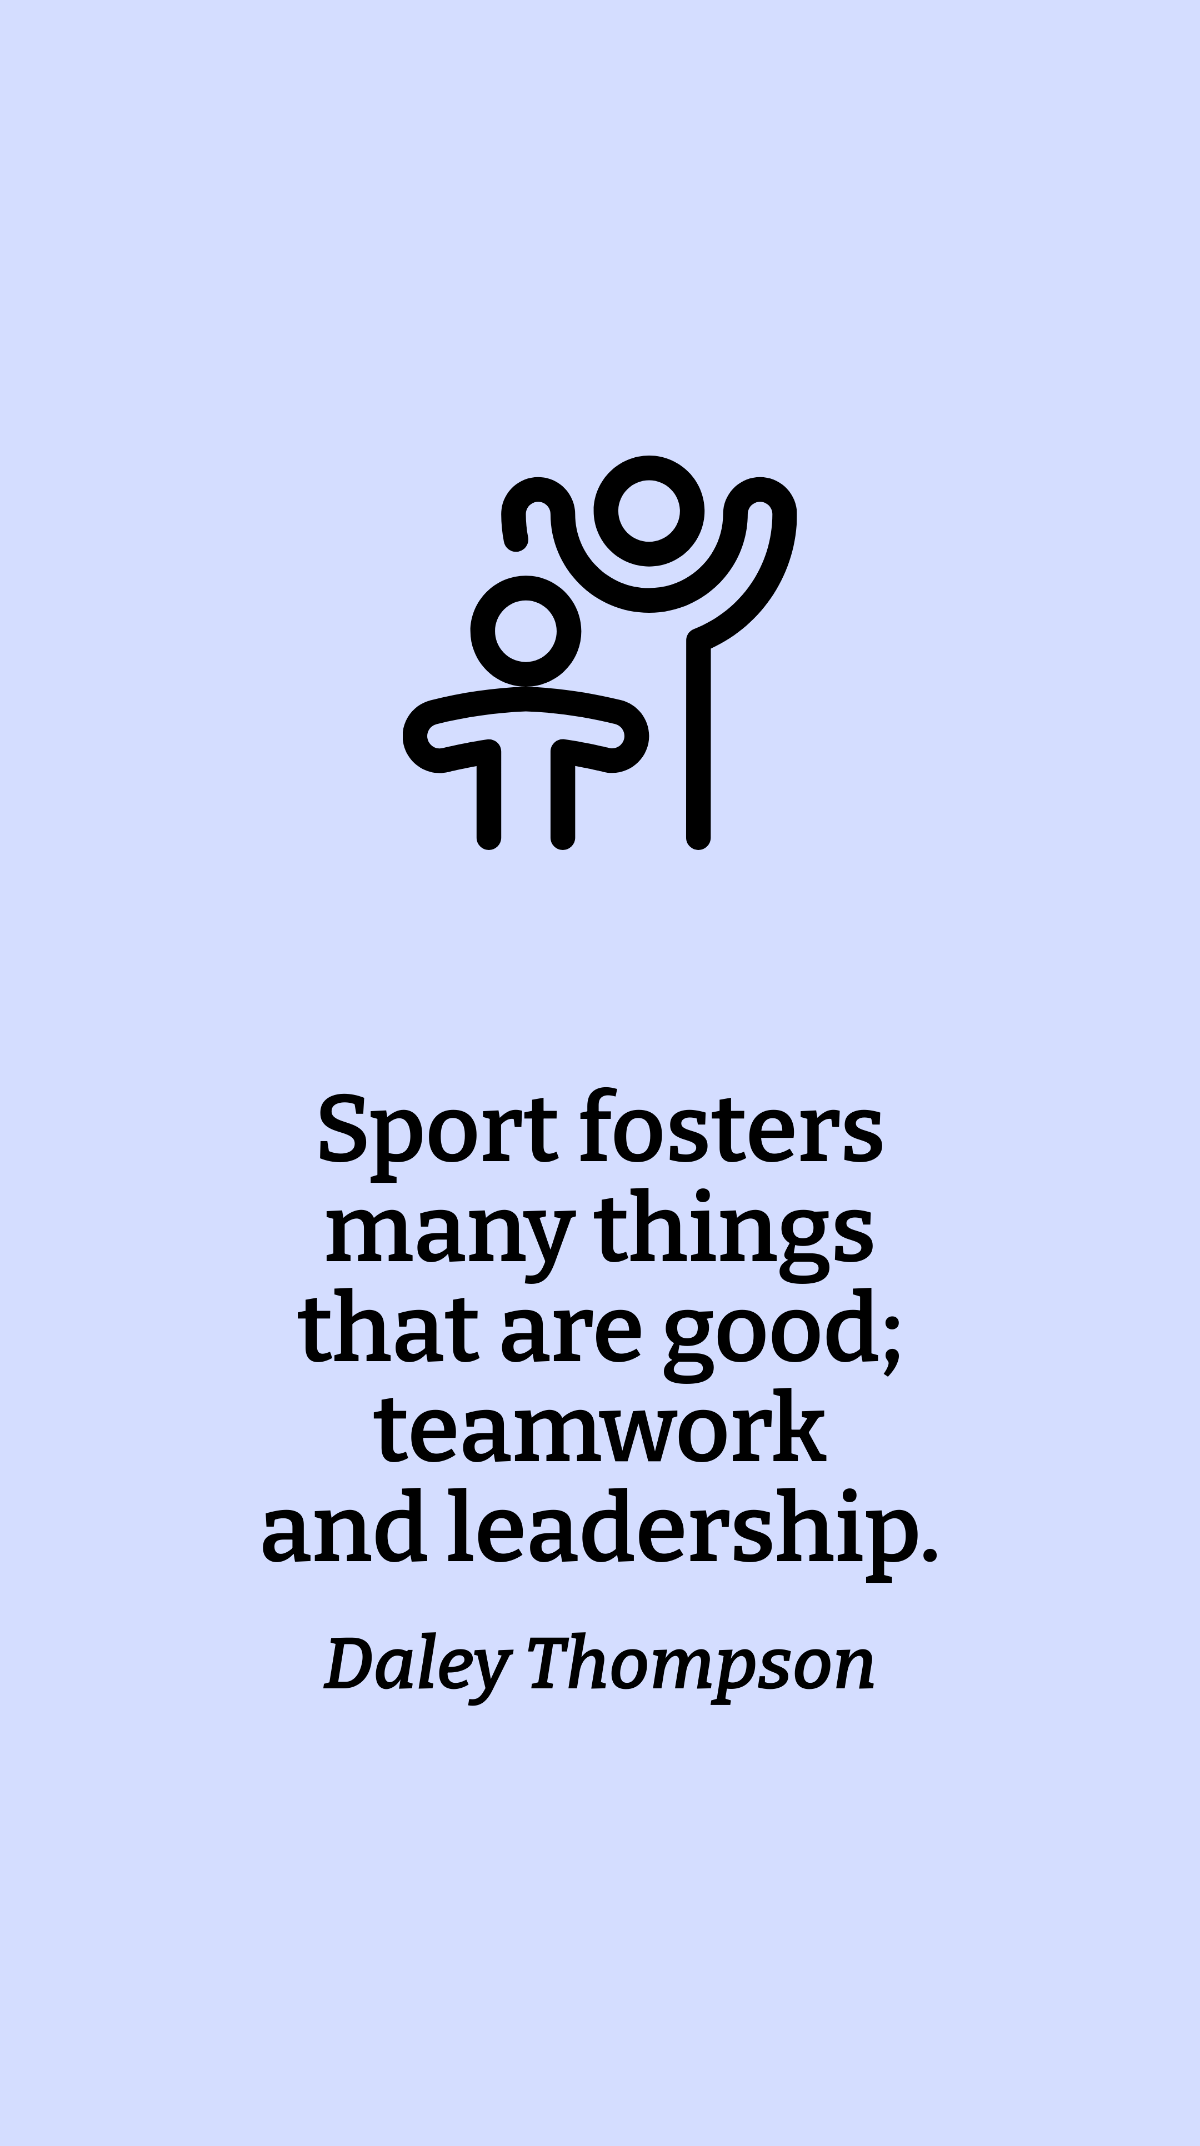 Free Daley Thompson - Sport fosters many things that are good; teamwork and leadership. Template